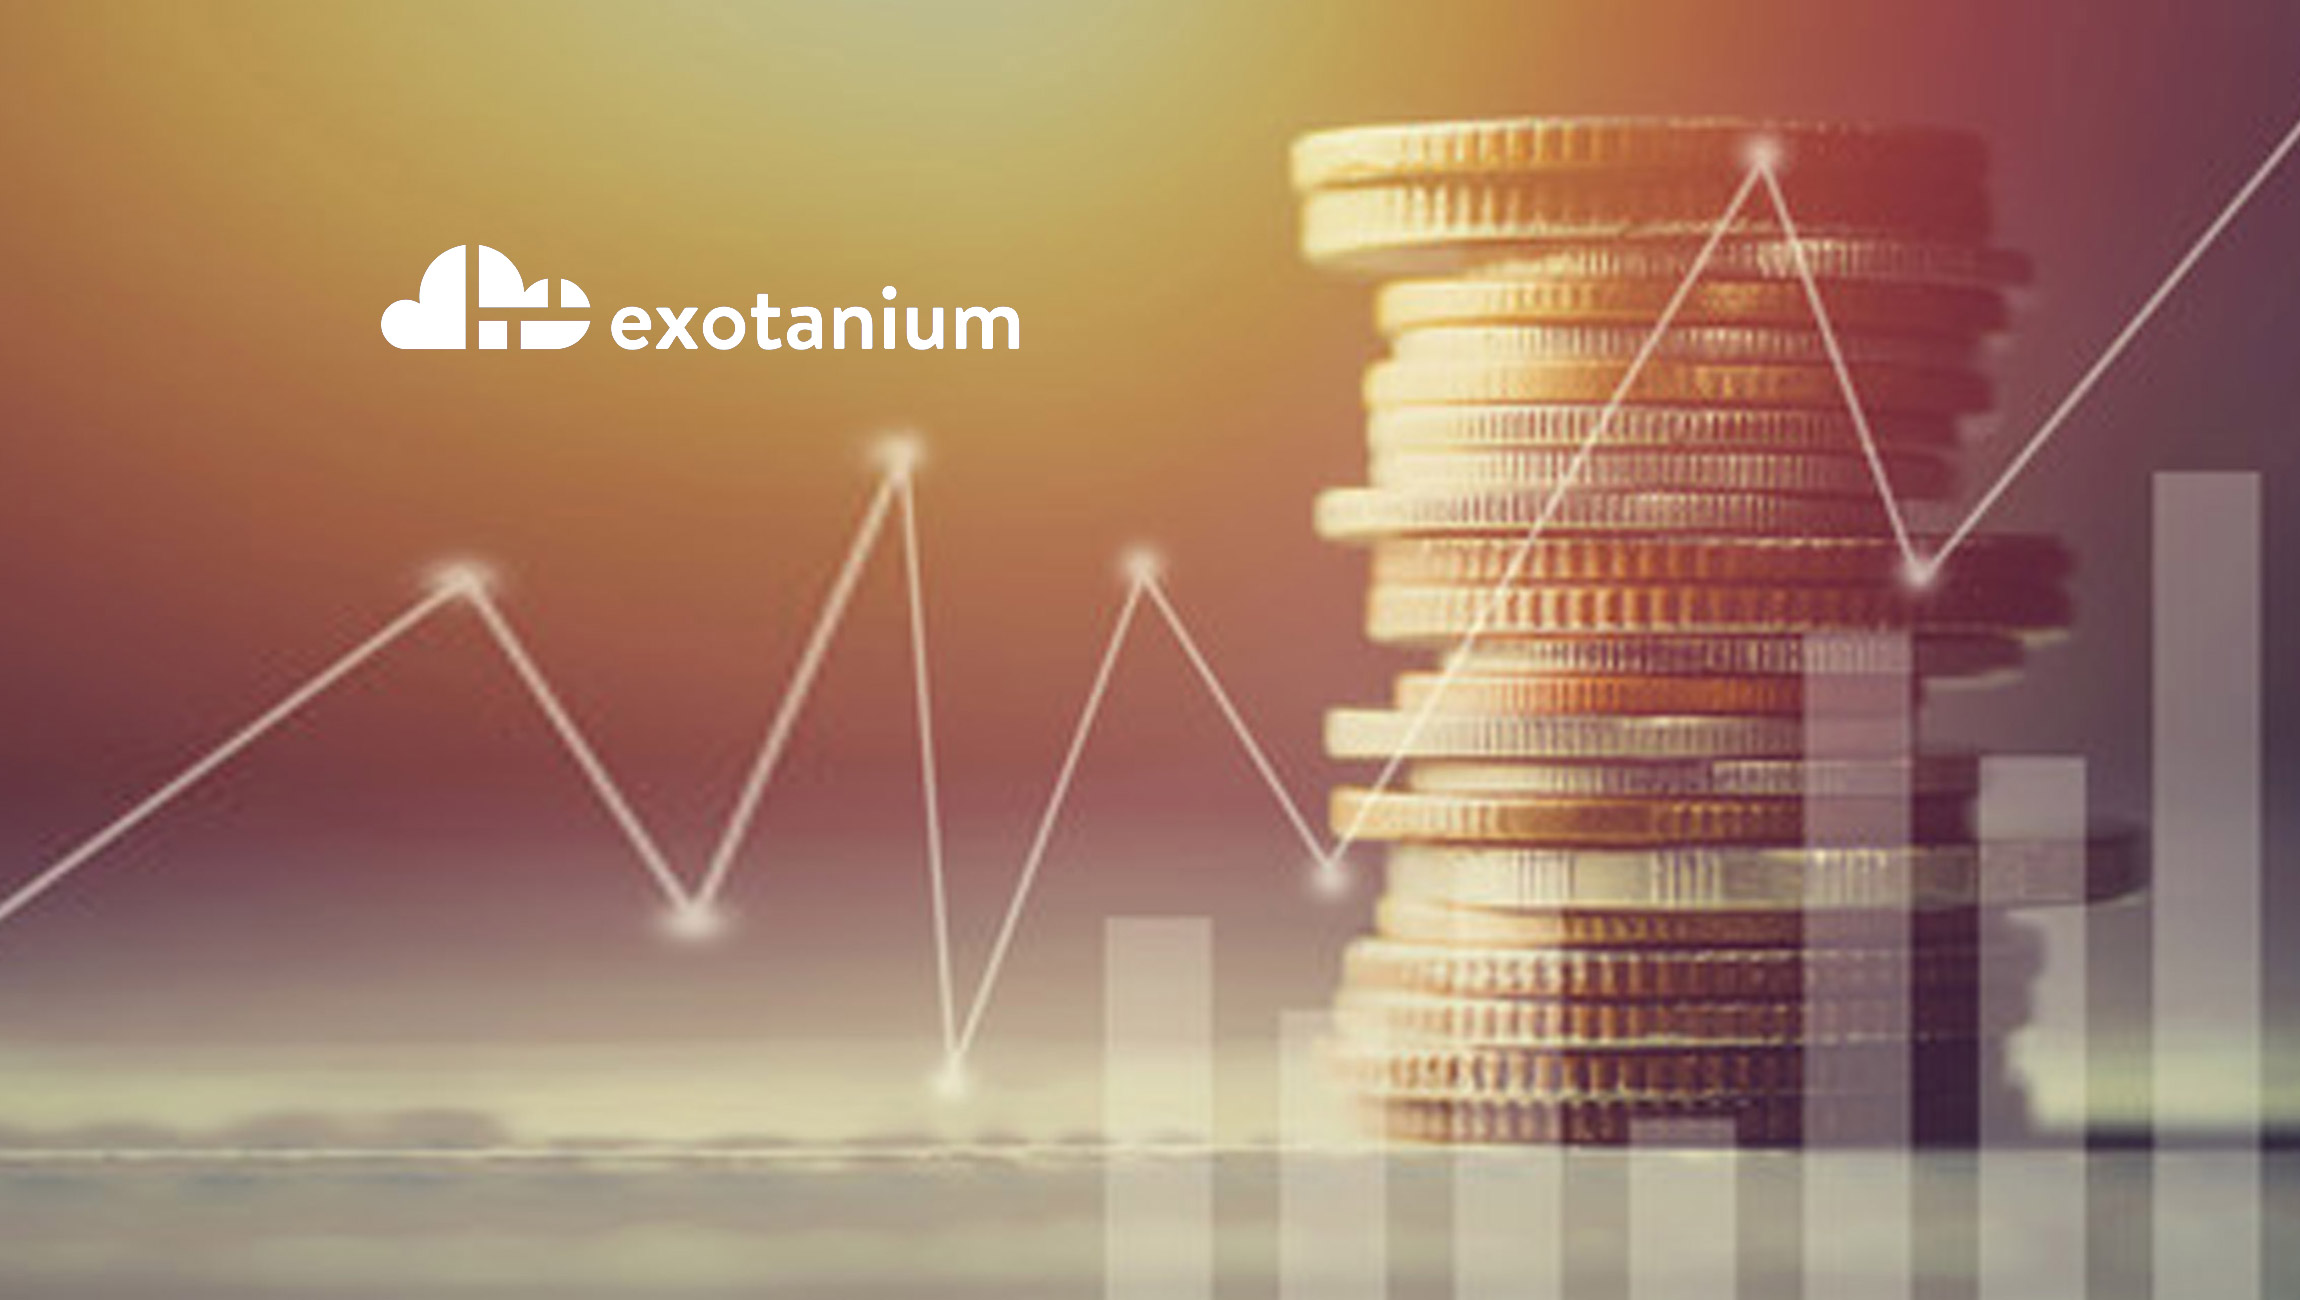 Exotanium Raises $12 Million in Series A Round Funding, Helps Enterprises Manage and Optimize Cloud Services More Effectively